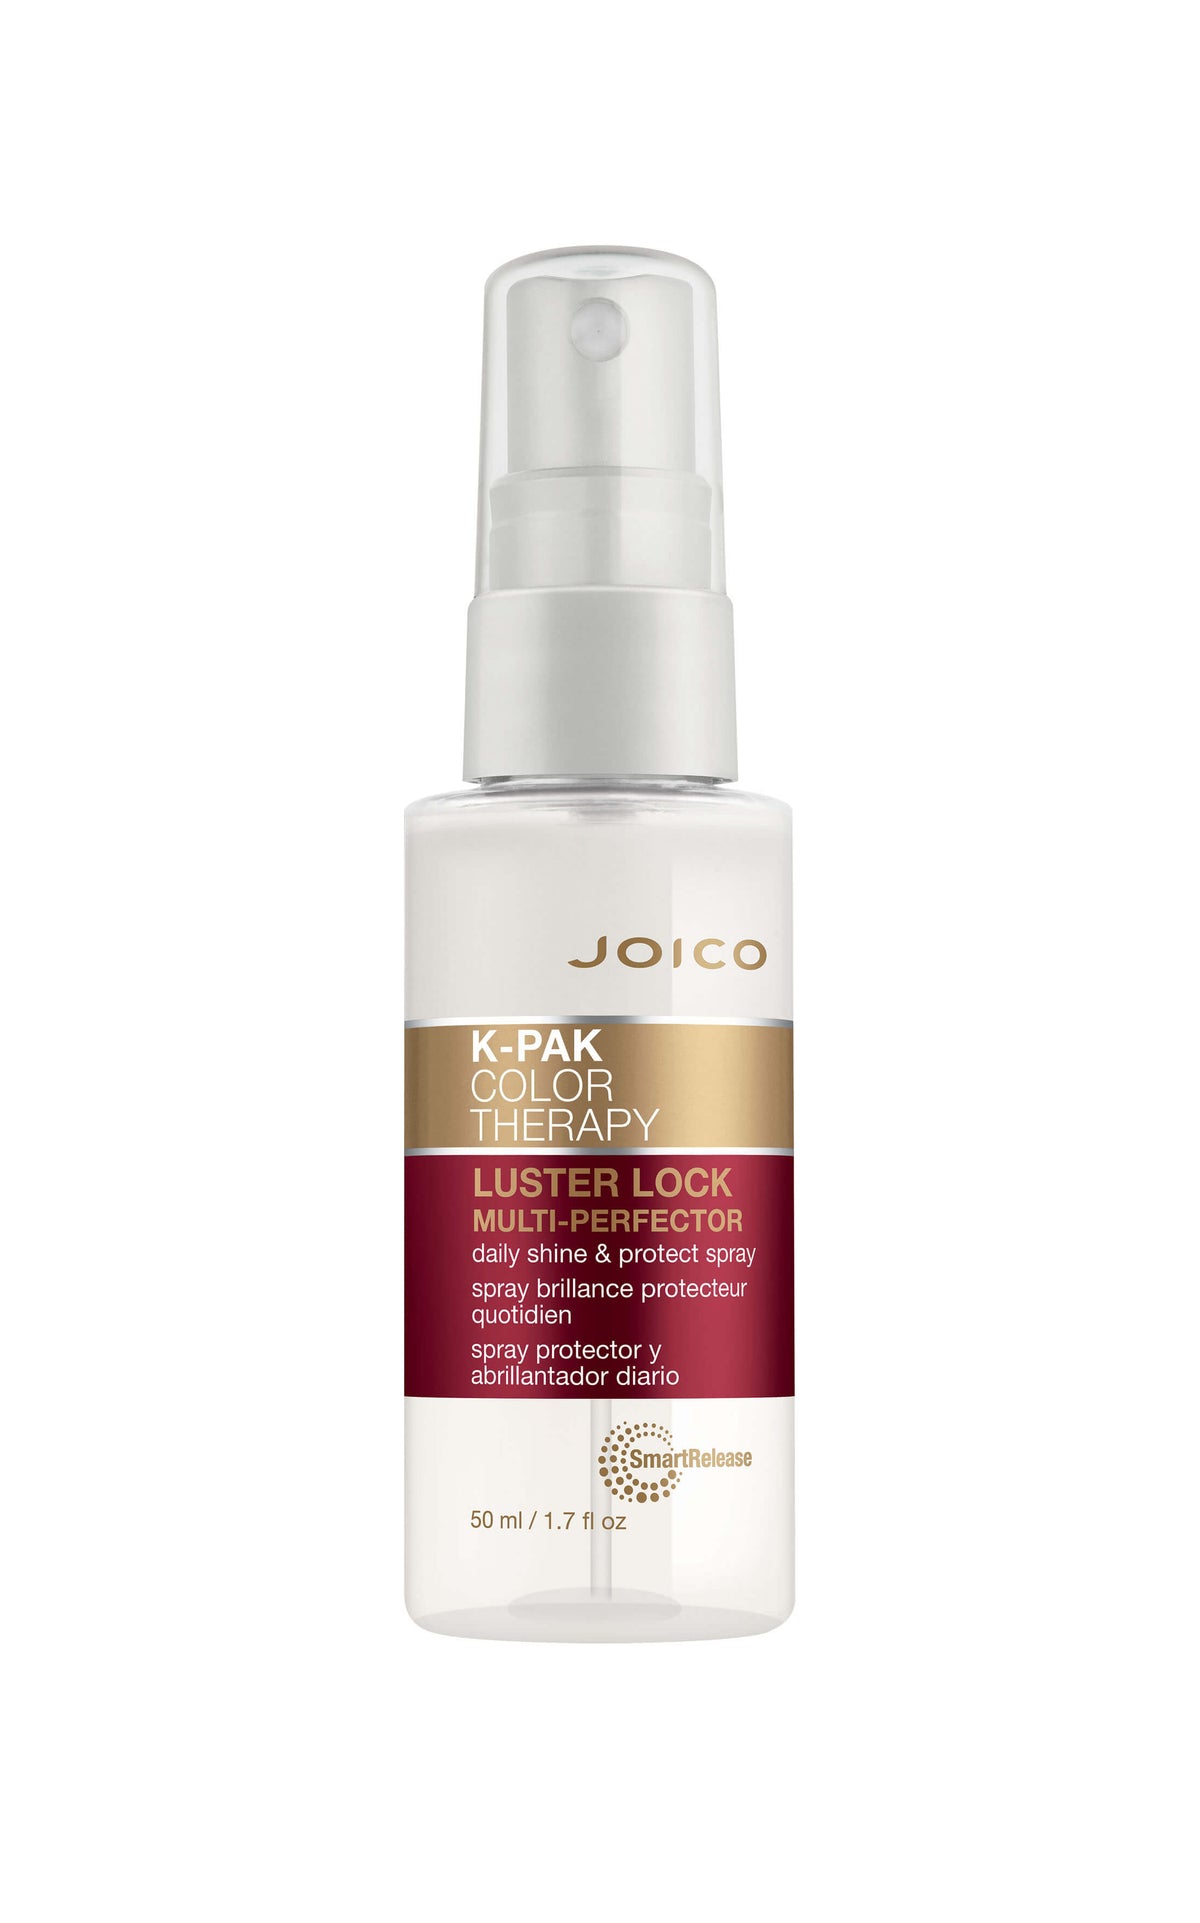 Joico K-Pak Color Therapy Luster Lock Multi-Perfector Haarspray 50 ml